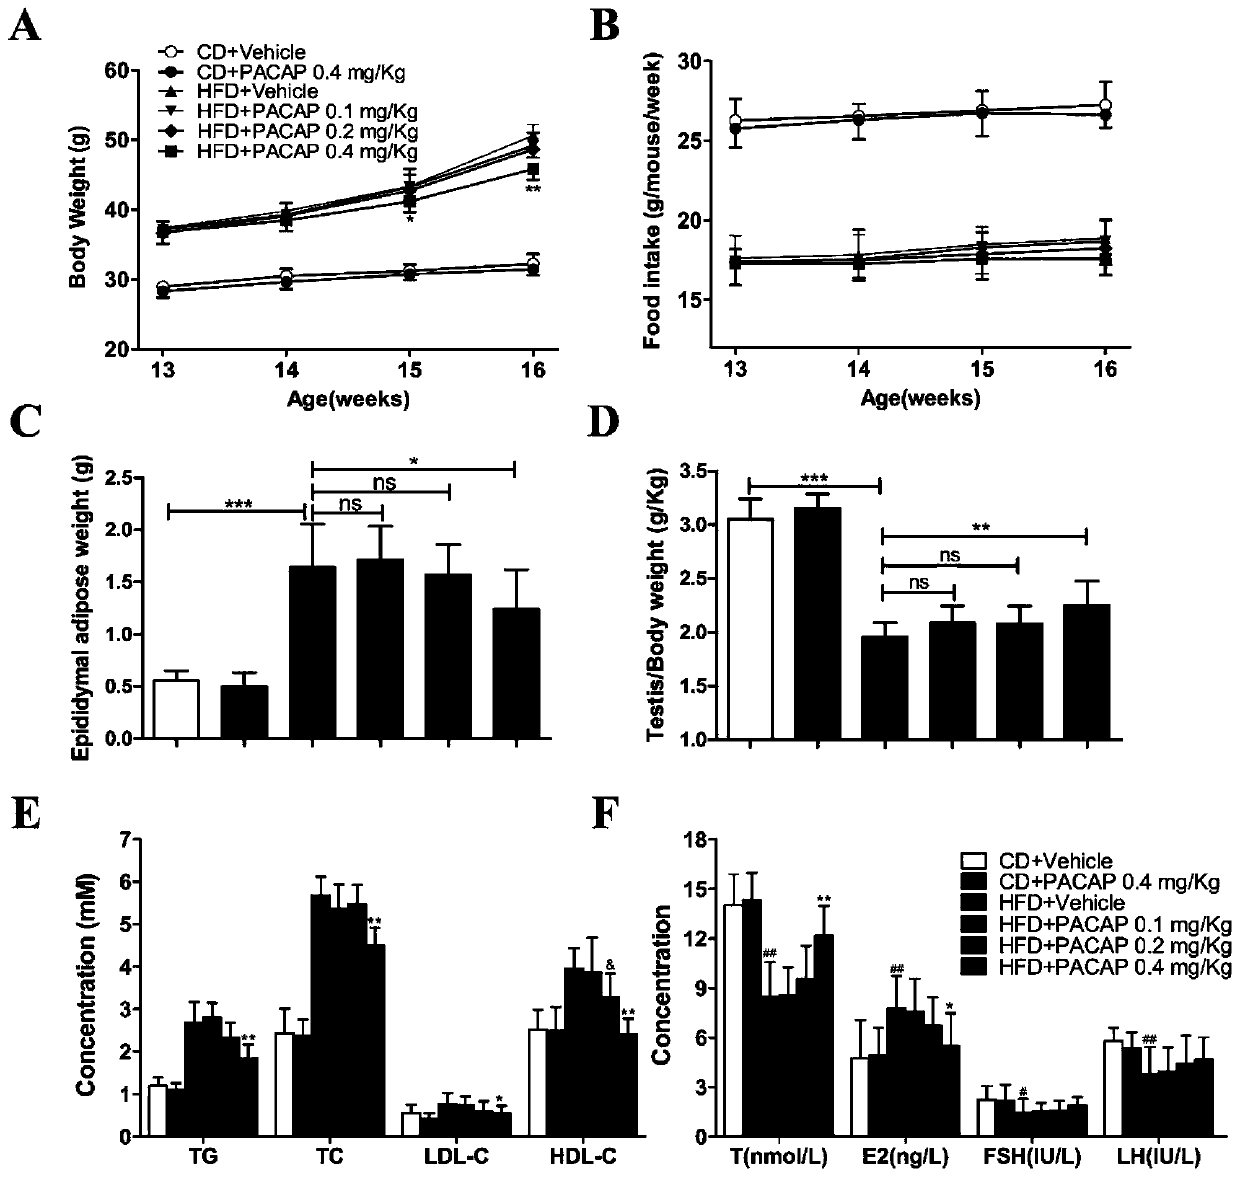 Application of bioactive polypeptide PACAP in preparation of drugs for improving fertility of obese men